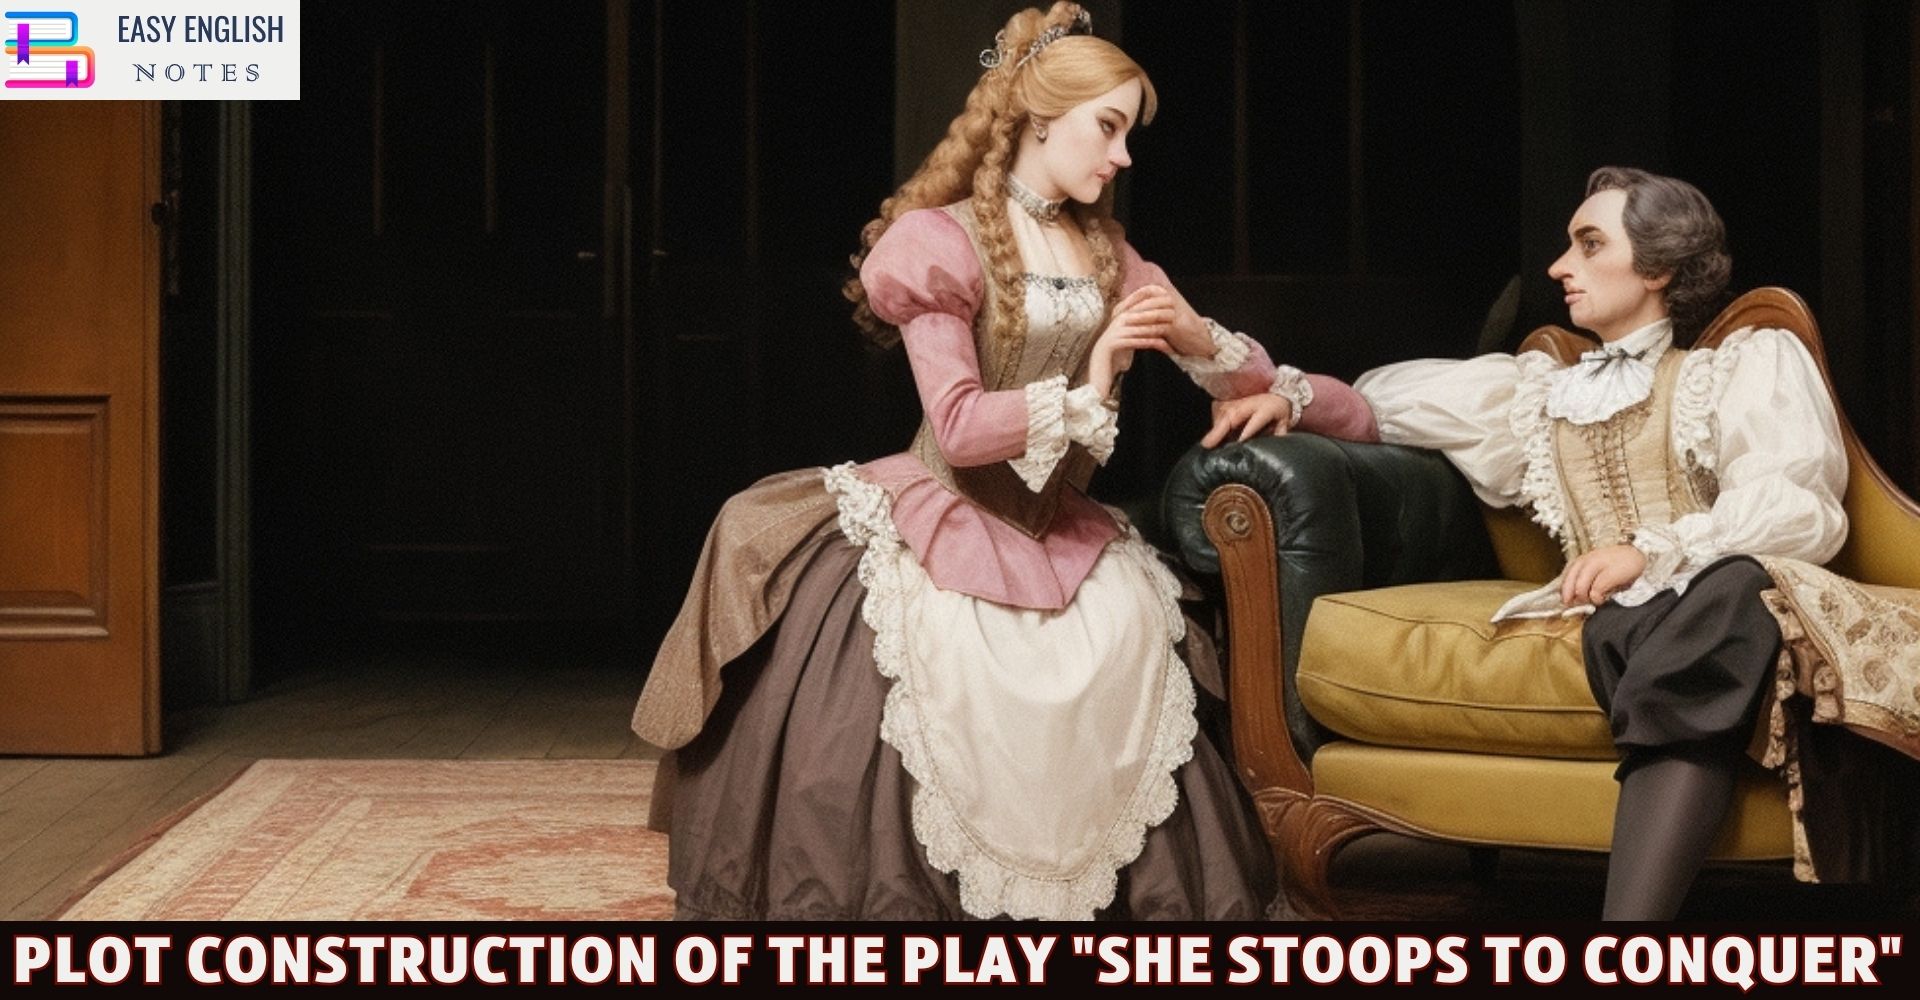 Plot Construction Of The Play "She Stoops To Conquer"